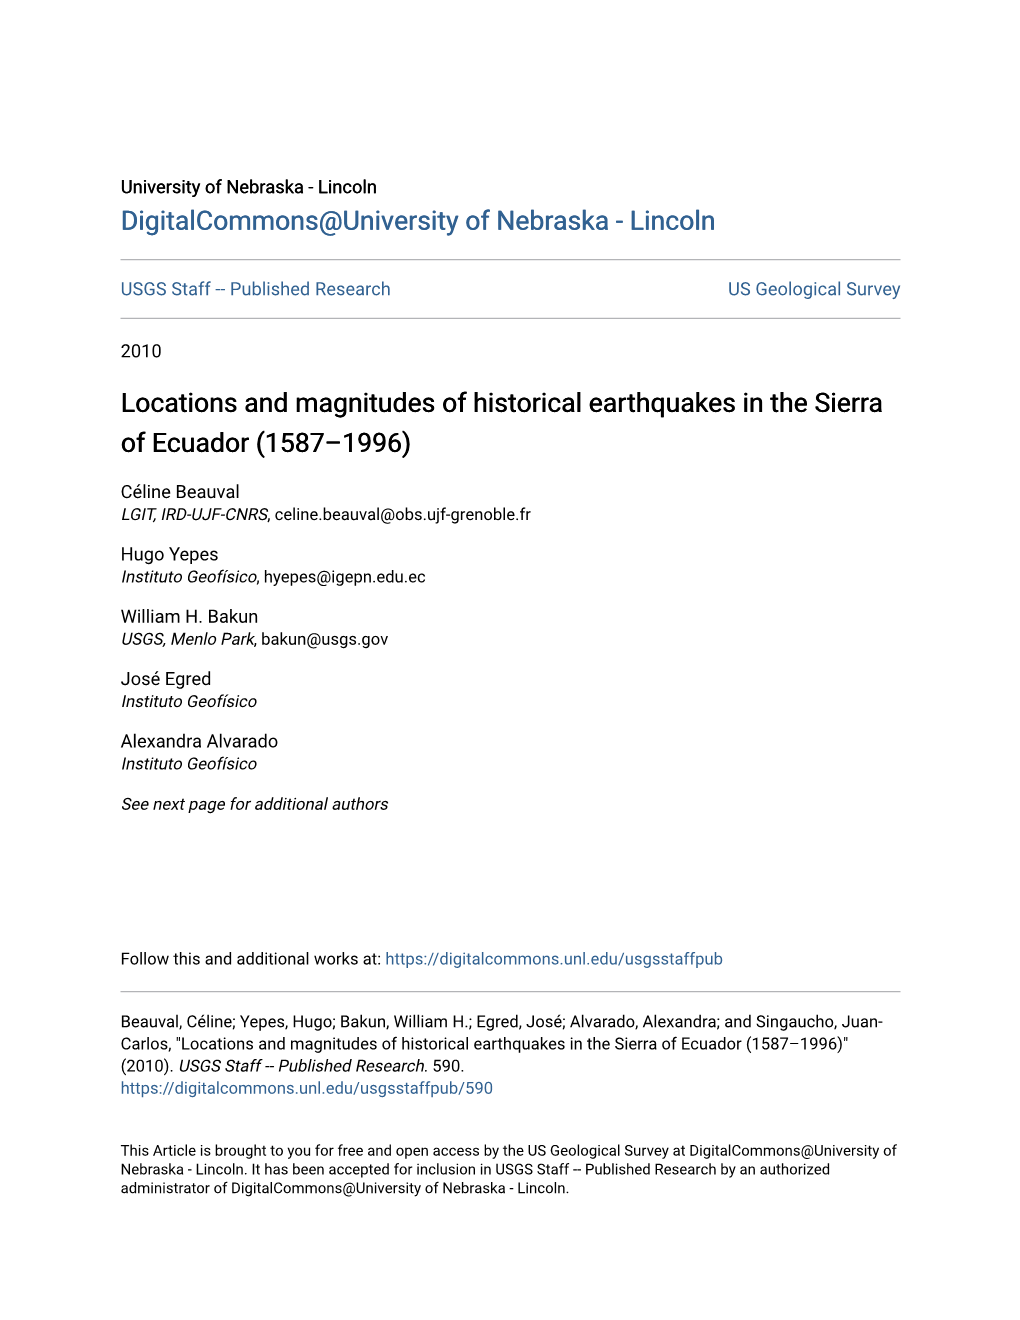 Locations and Magnitudes of Historical Earthquakes in the Sierra of Ecuador (1587–1996)